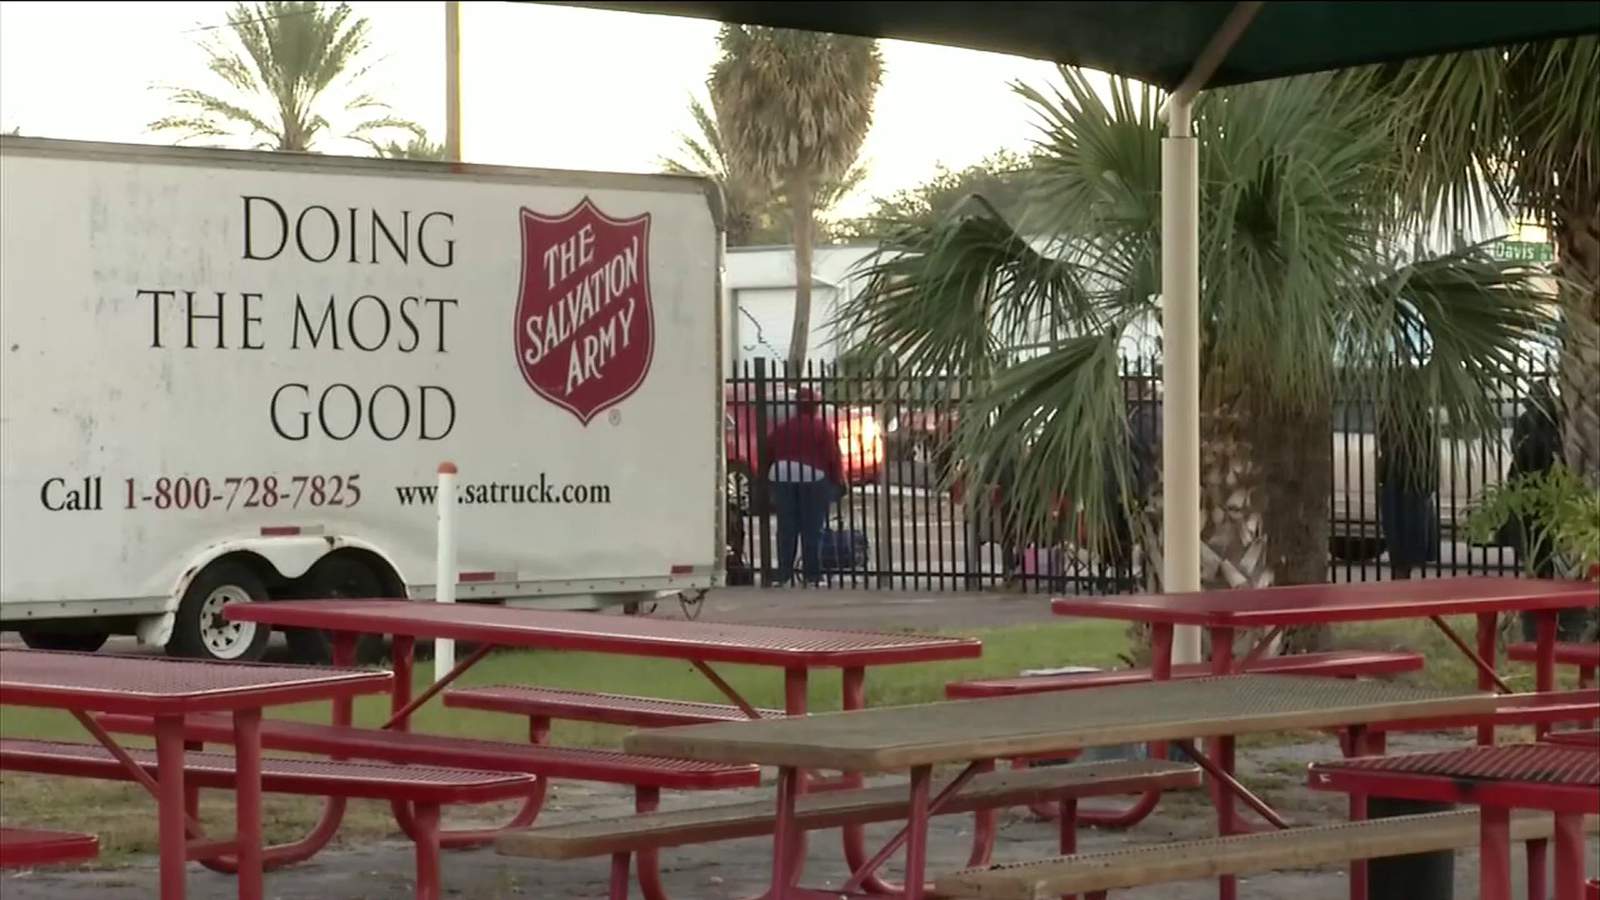 The Salvation Army's annual Thanksgiving food giveaway is today